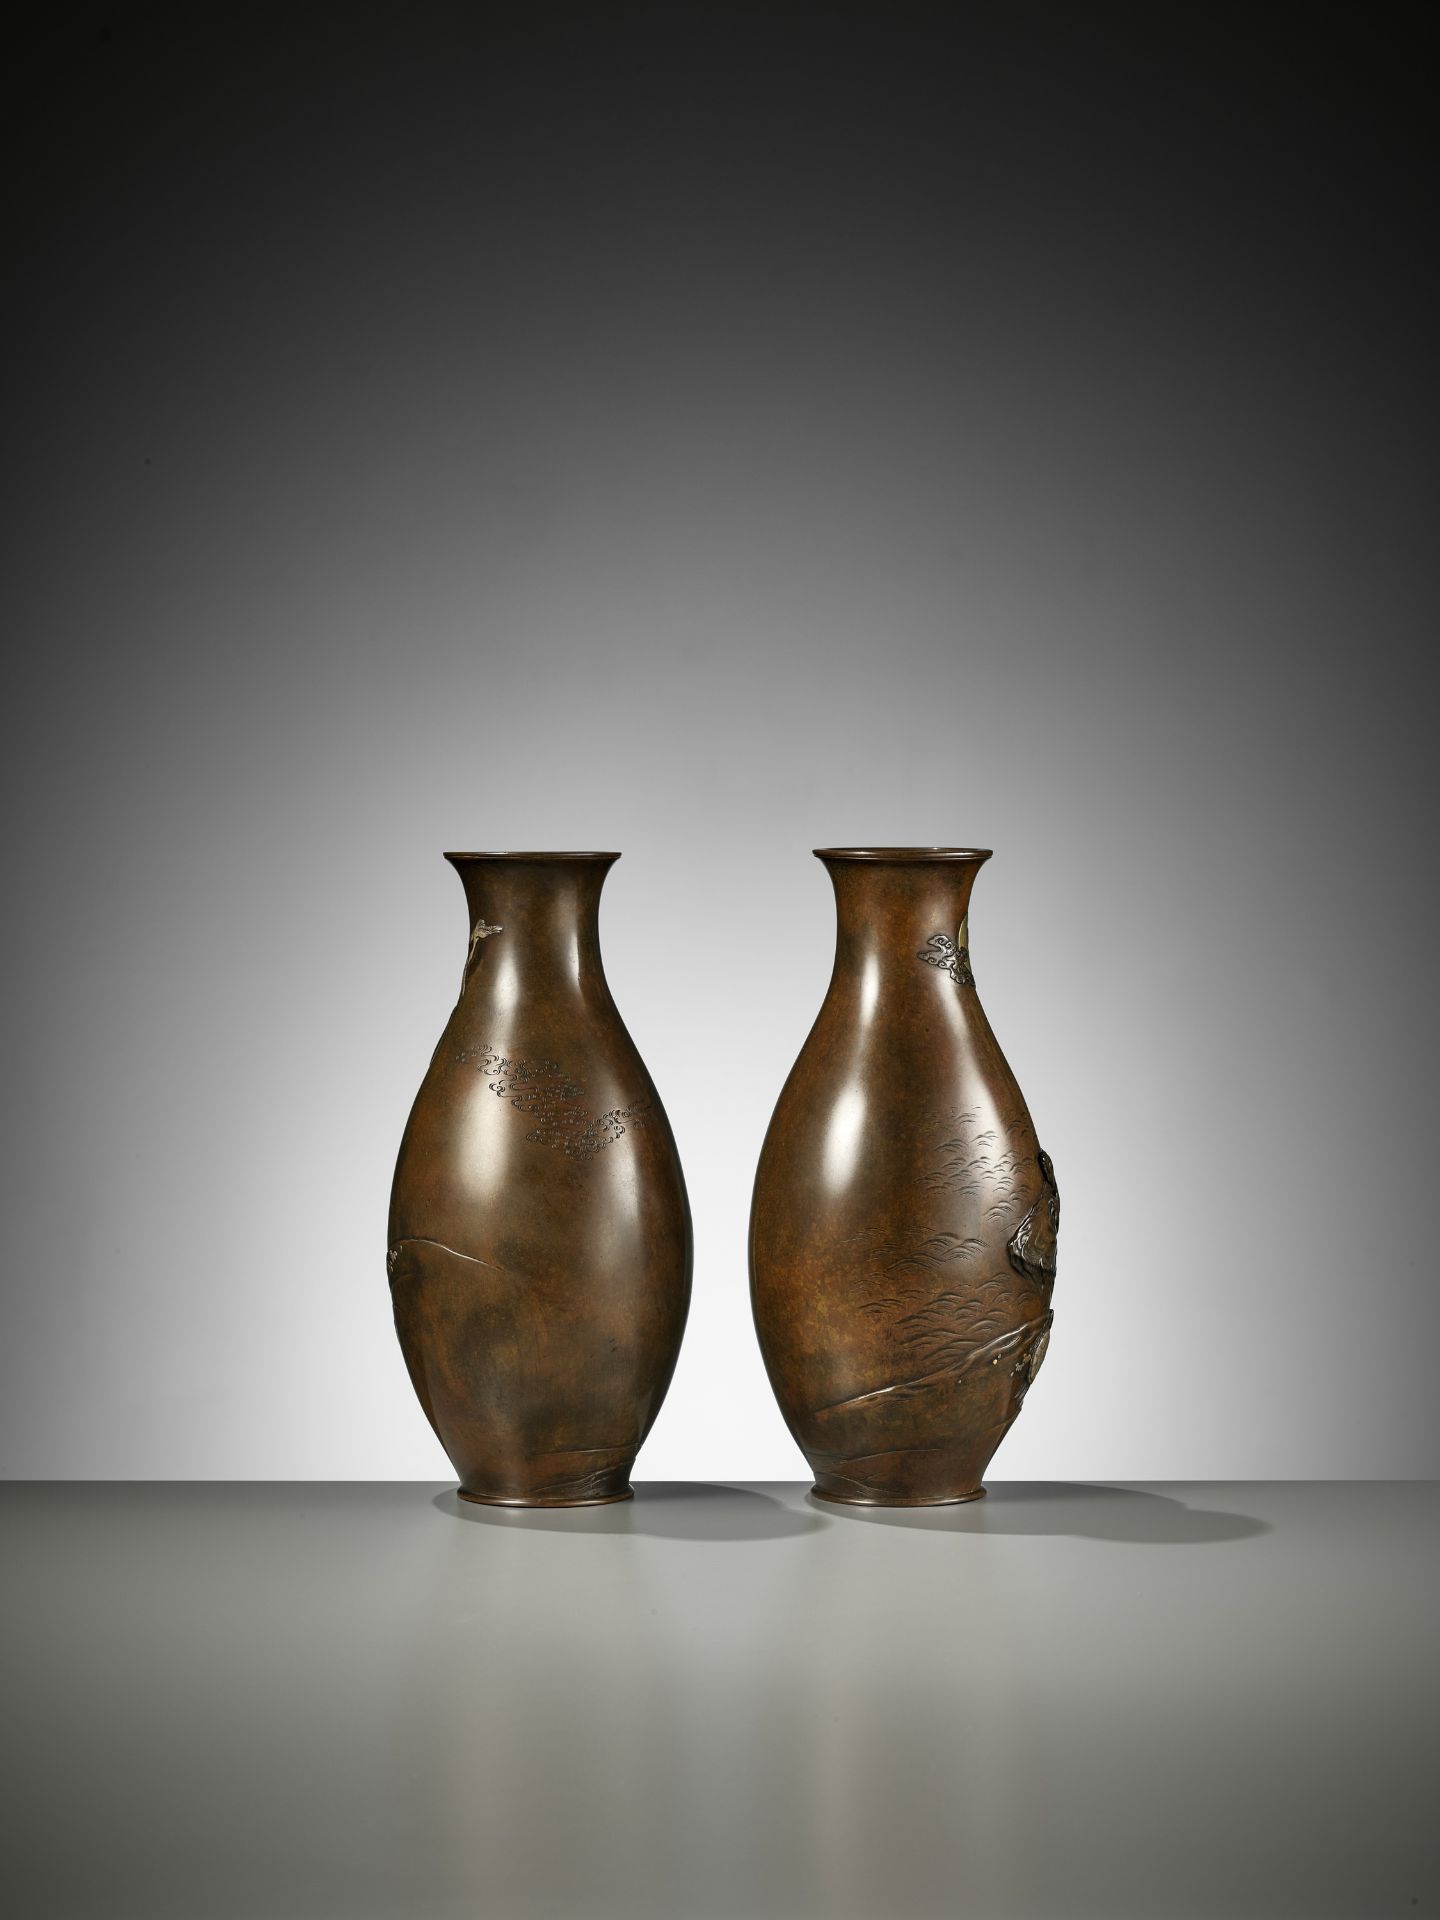 CHOMIN: A SUPERB PAIR OF INLAID BRONZE VASES WITH MINOGAME AND GEESE - Image 8 of 11